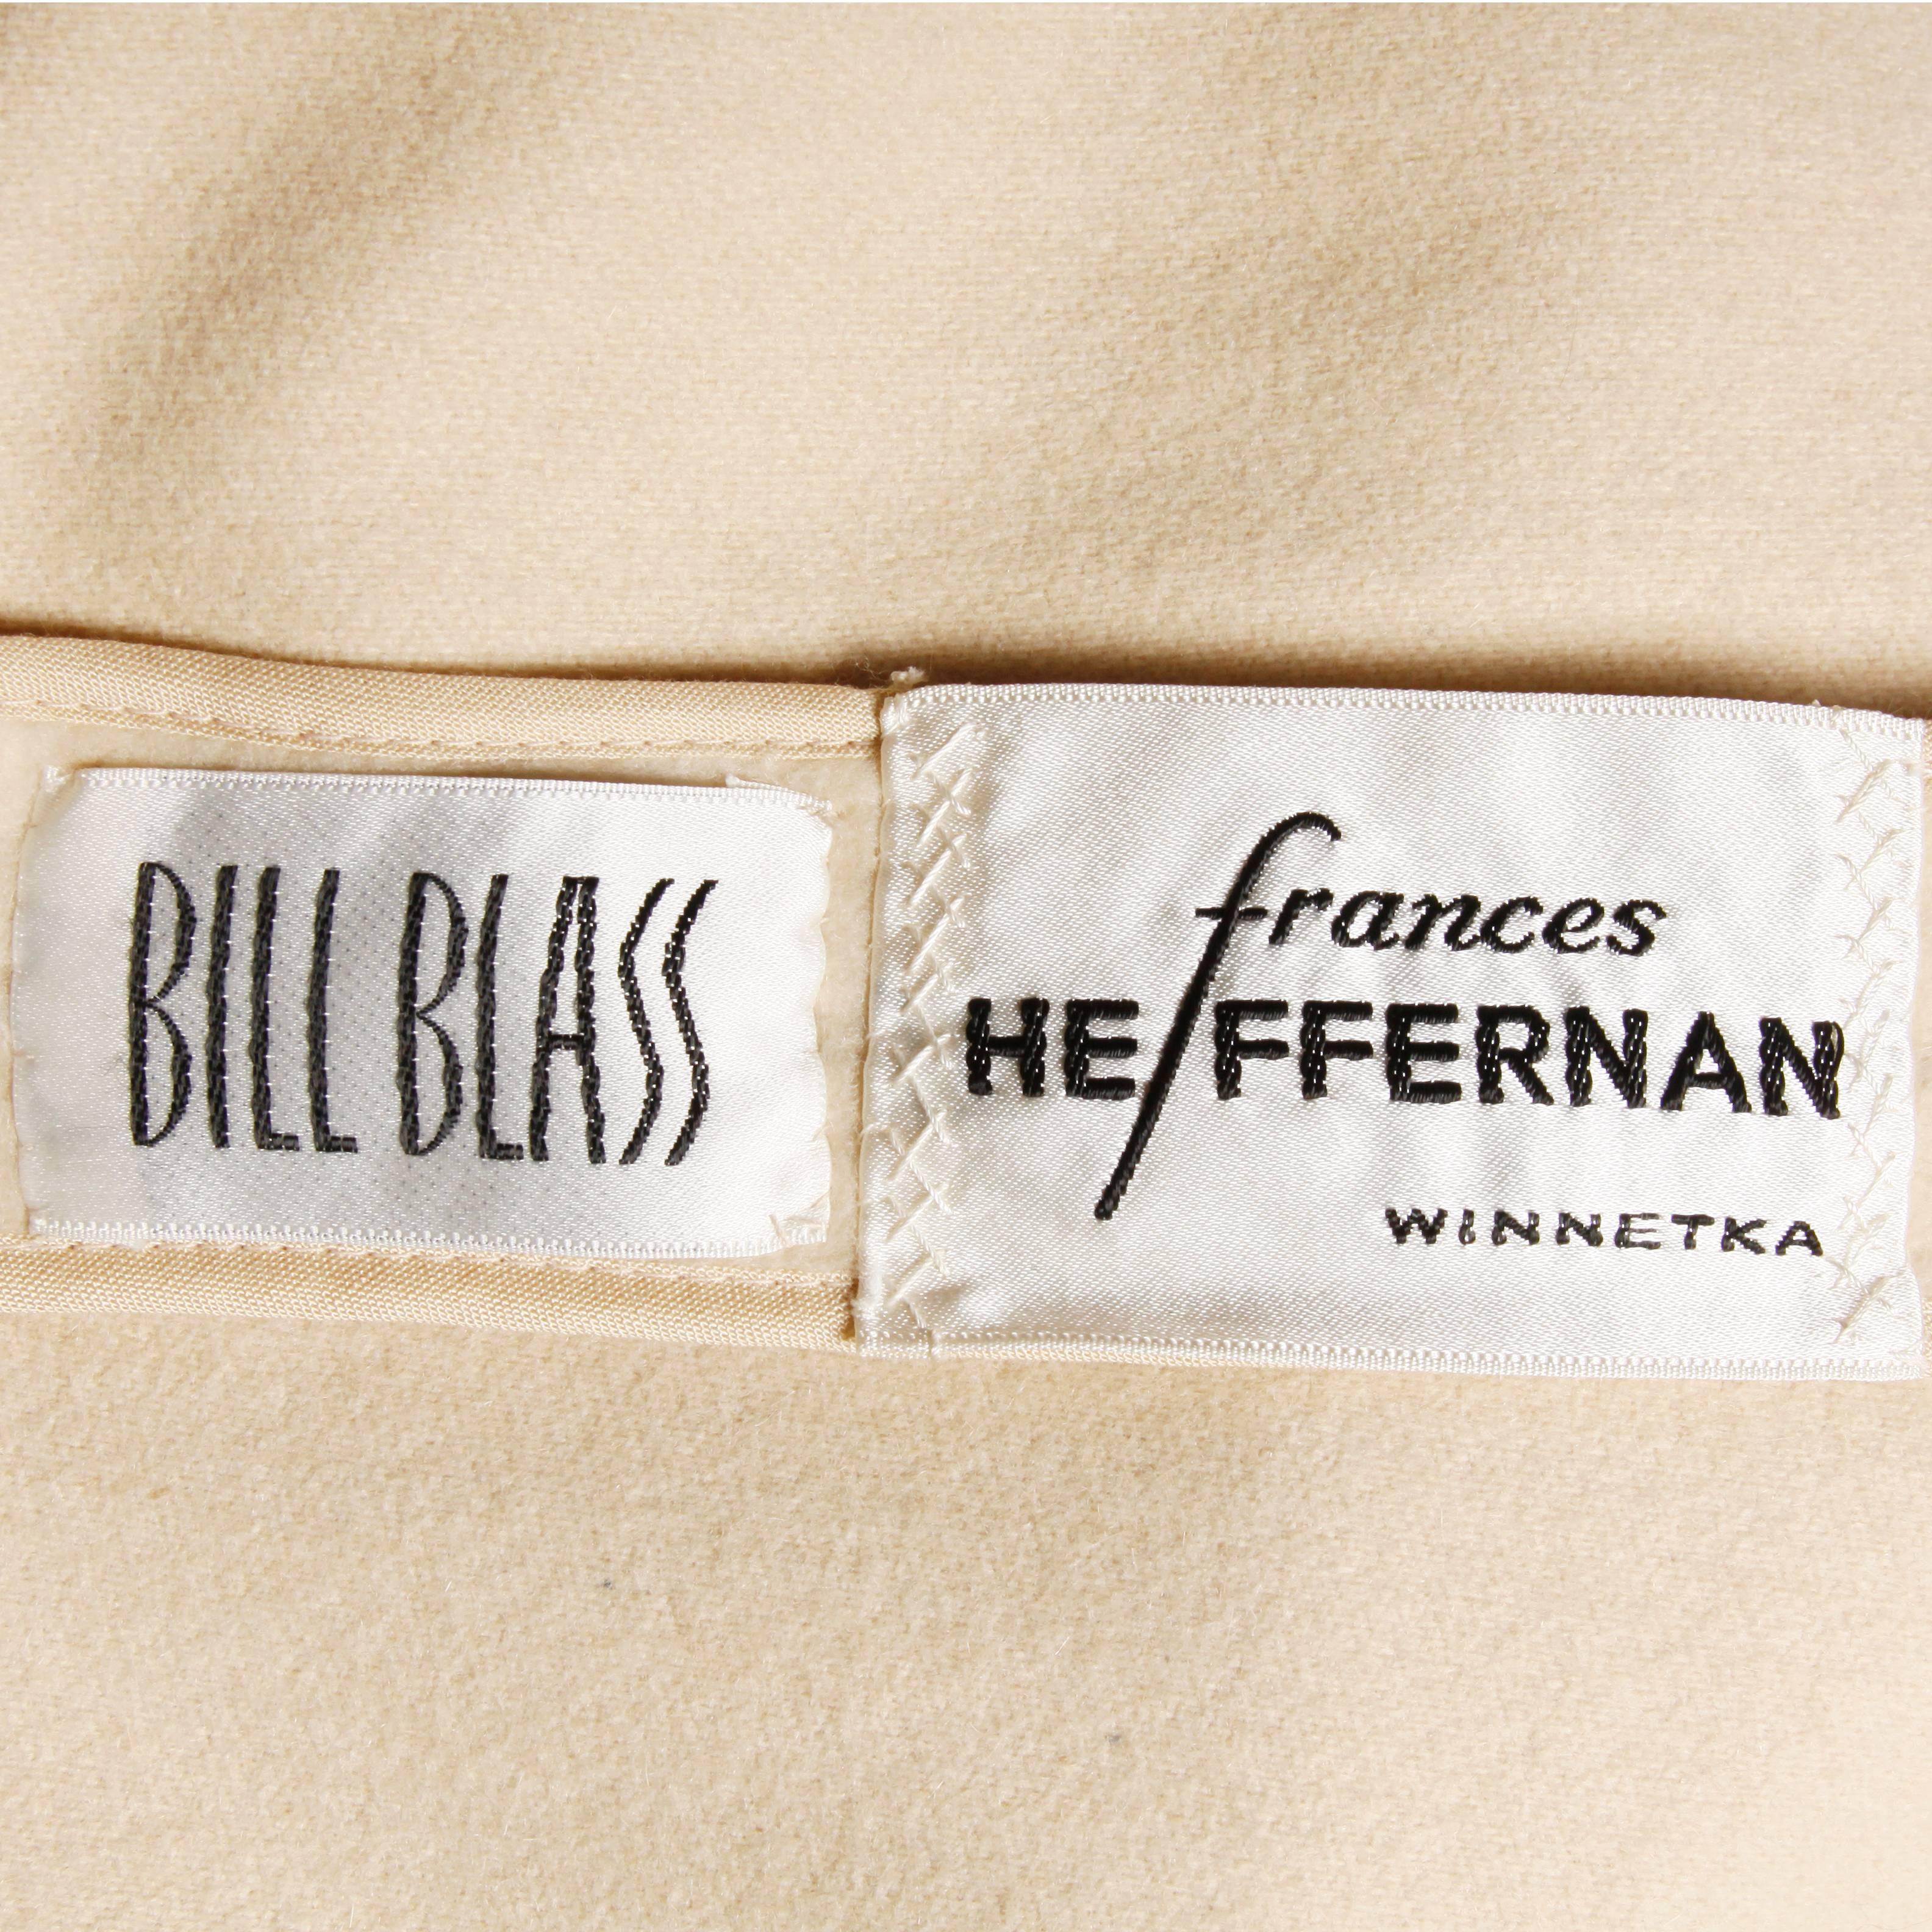 Stunning vintage cashmere maxi coat by Bill Blass for Frances Heffernan. Absolutely gorgeous quality and extra long length. 

Details:

Partially Lined
Side Pockets
Front Zip and Hook Closure
Marked Size: Not Marked
Estimated Size: